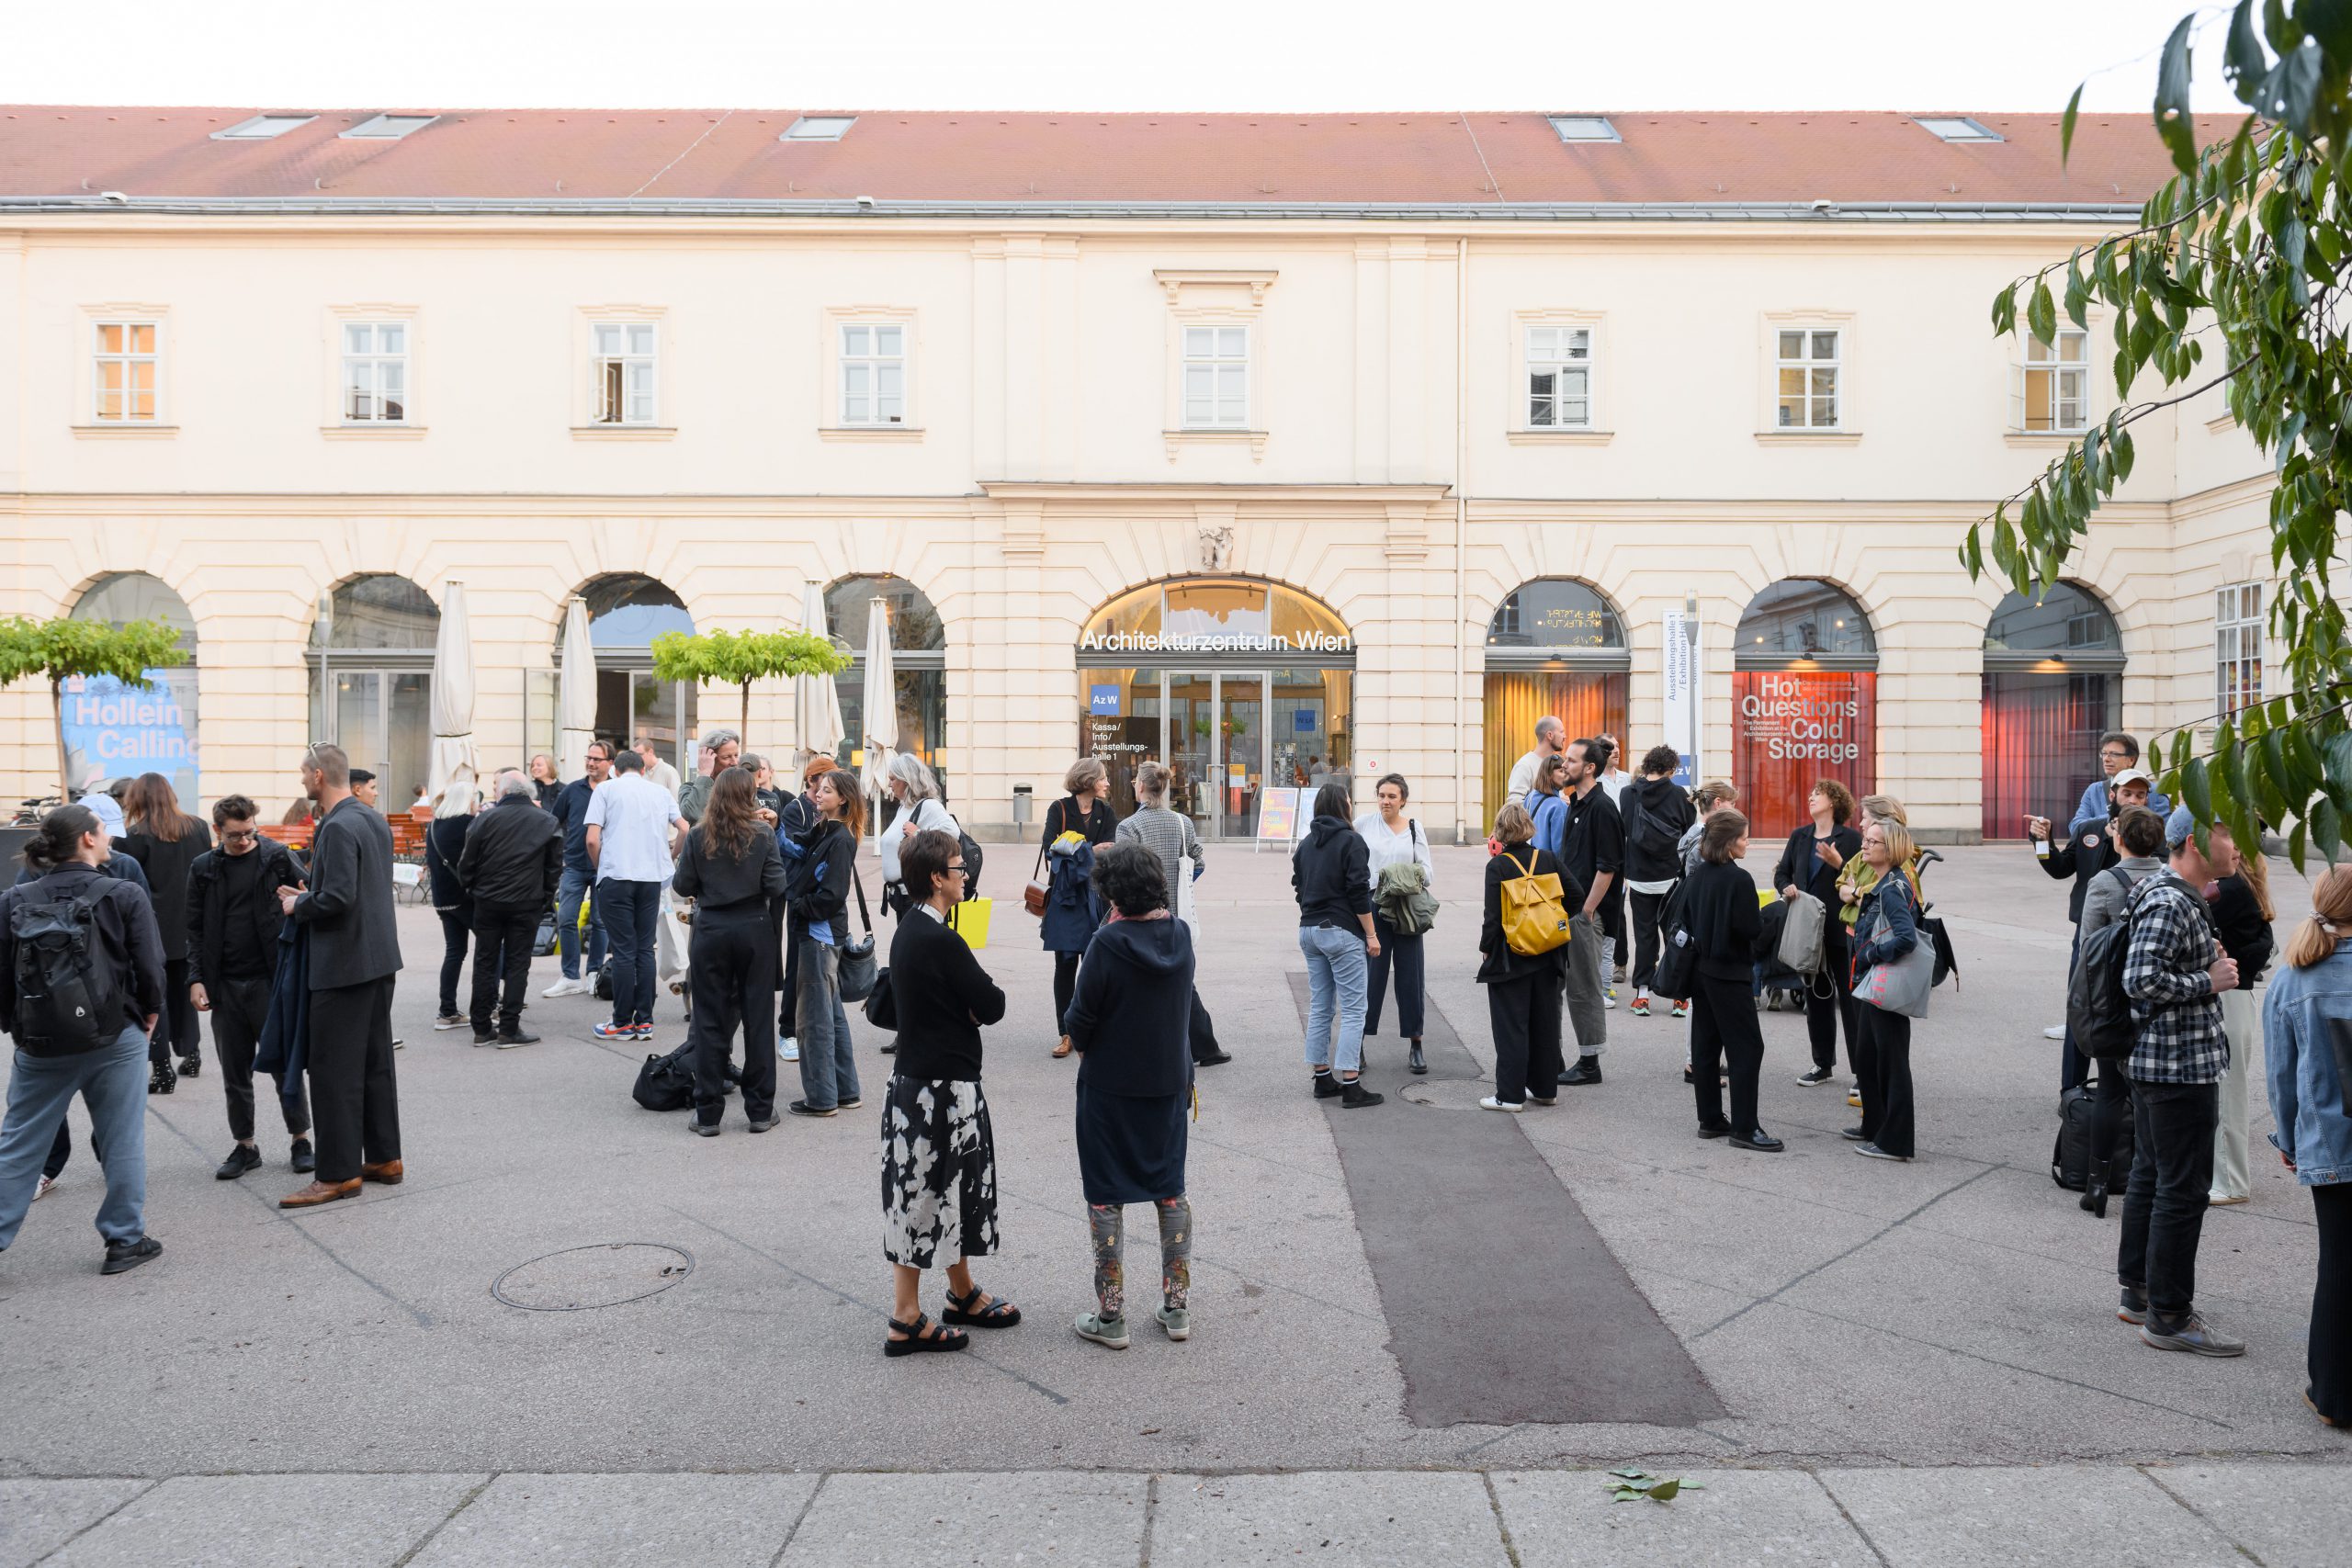 Many people on a square with a few trees, behind them a large door with the words Architekturzentrum Wien on it